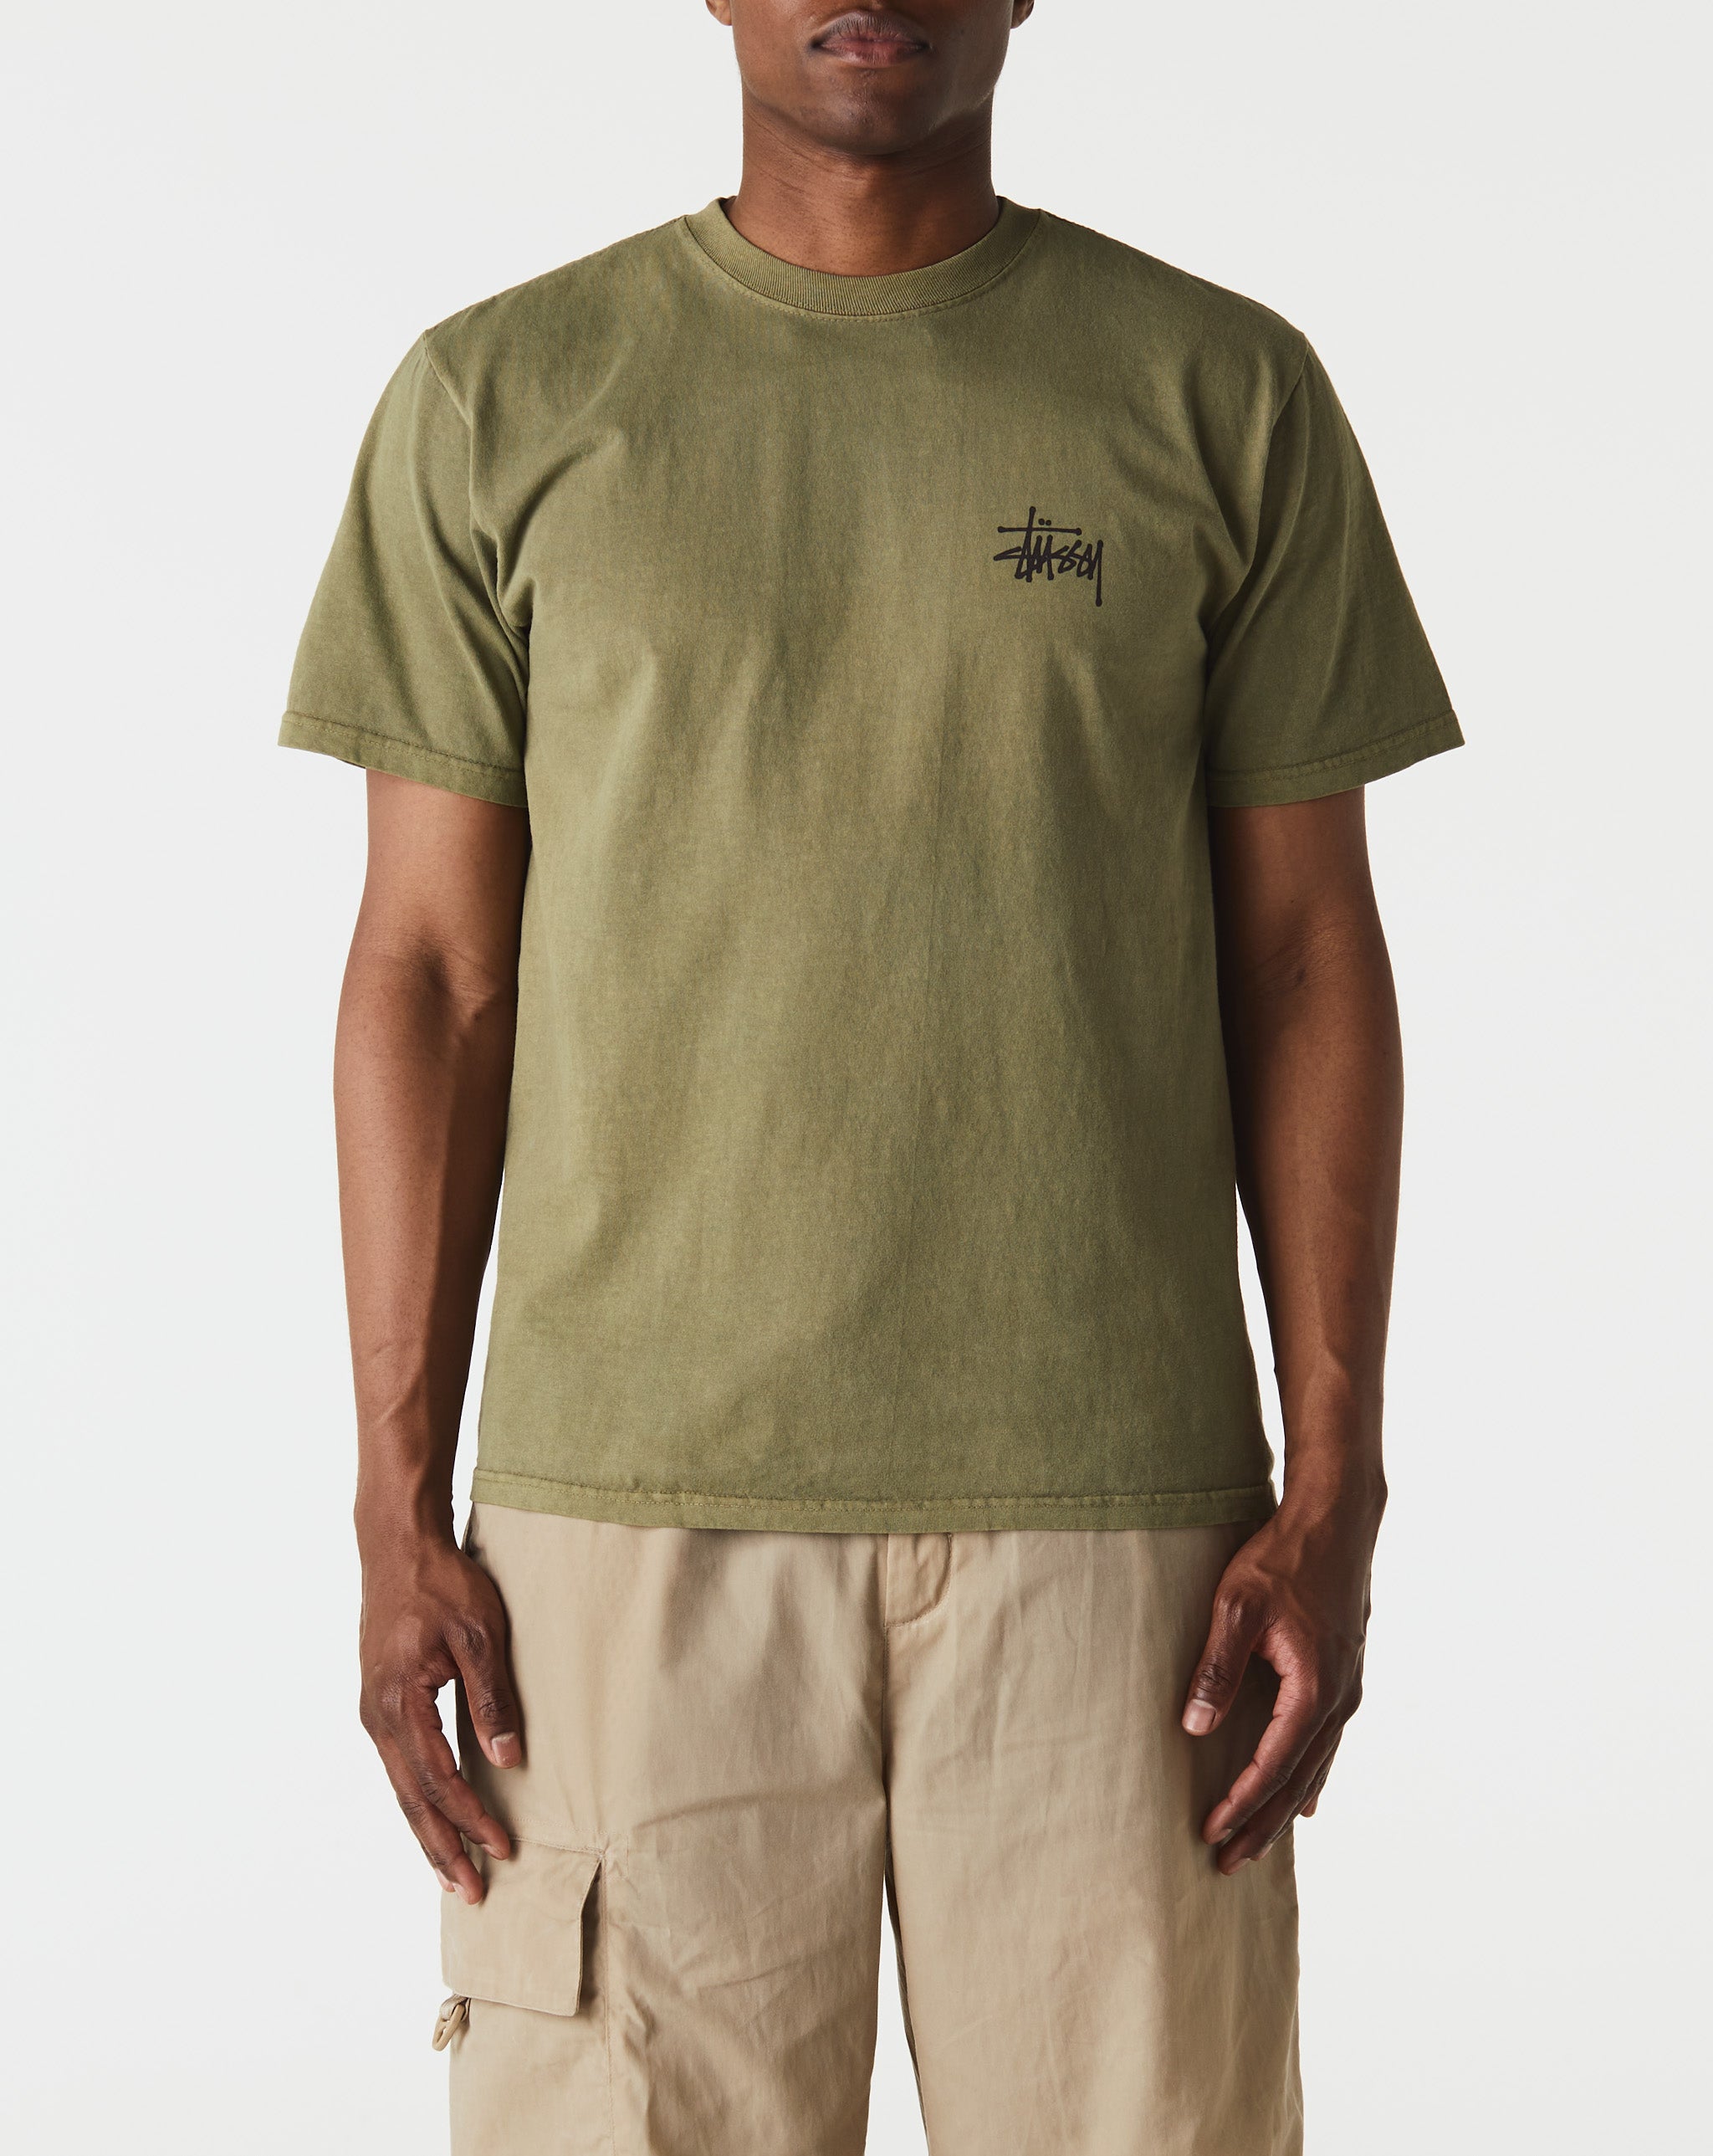 Stüssy Filling Pieces embroidered logo T-shirt  - Cheap Cerbe Jordan outlet